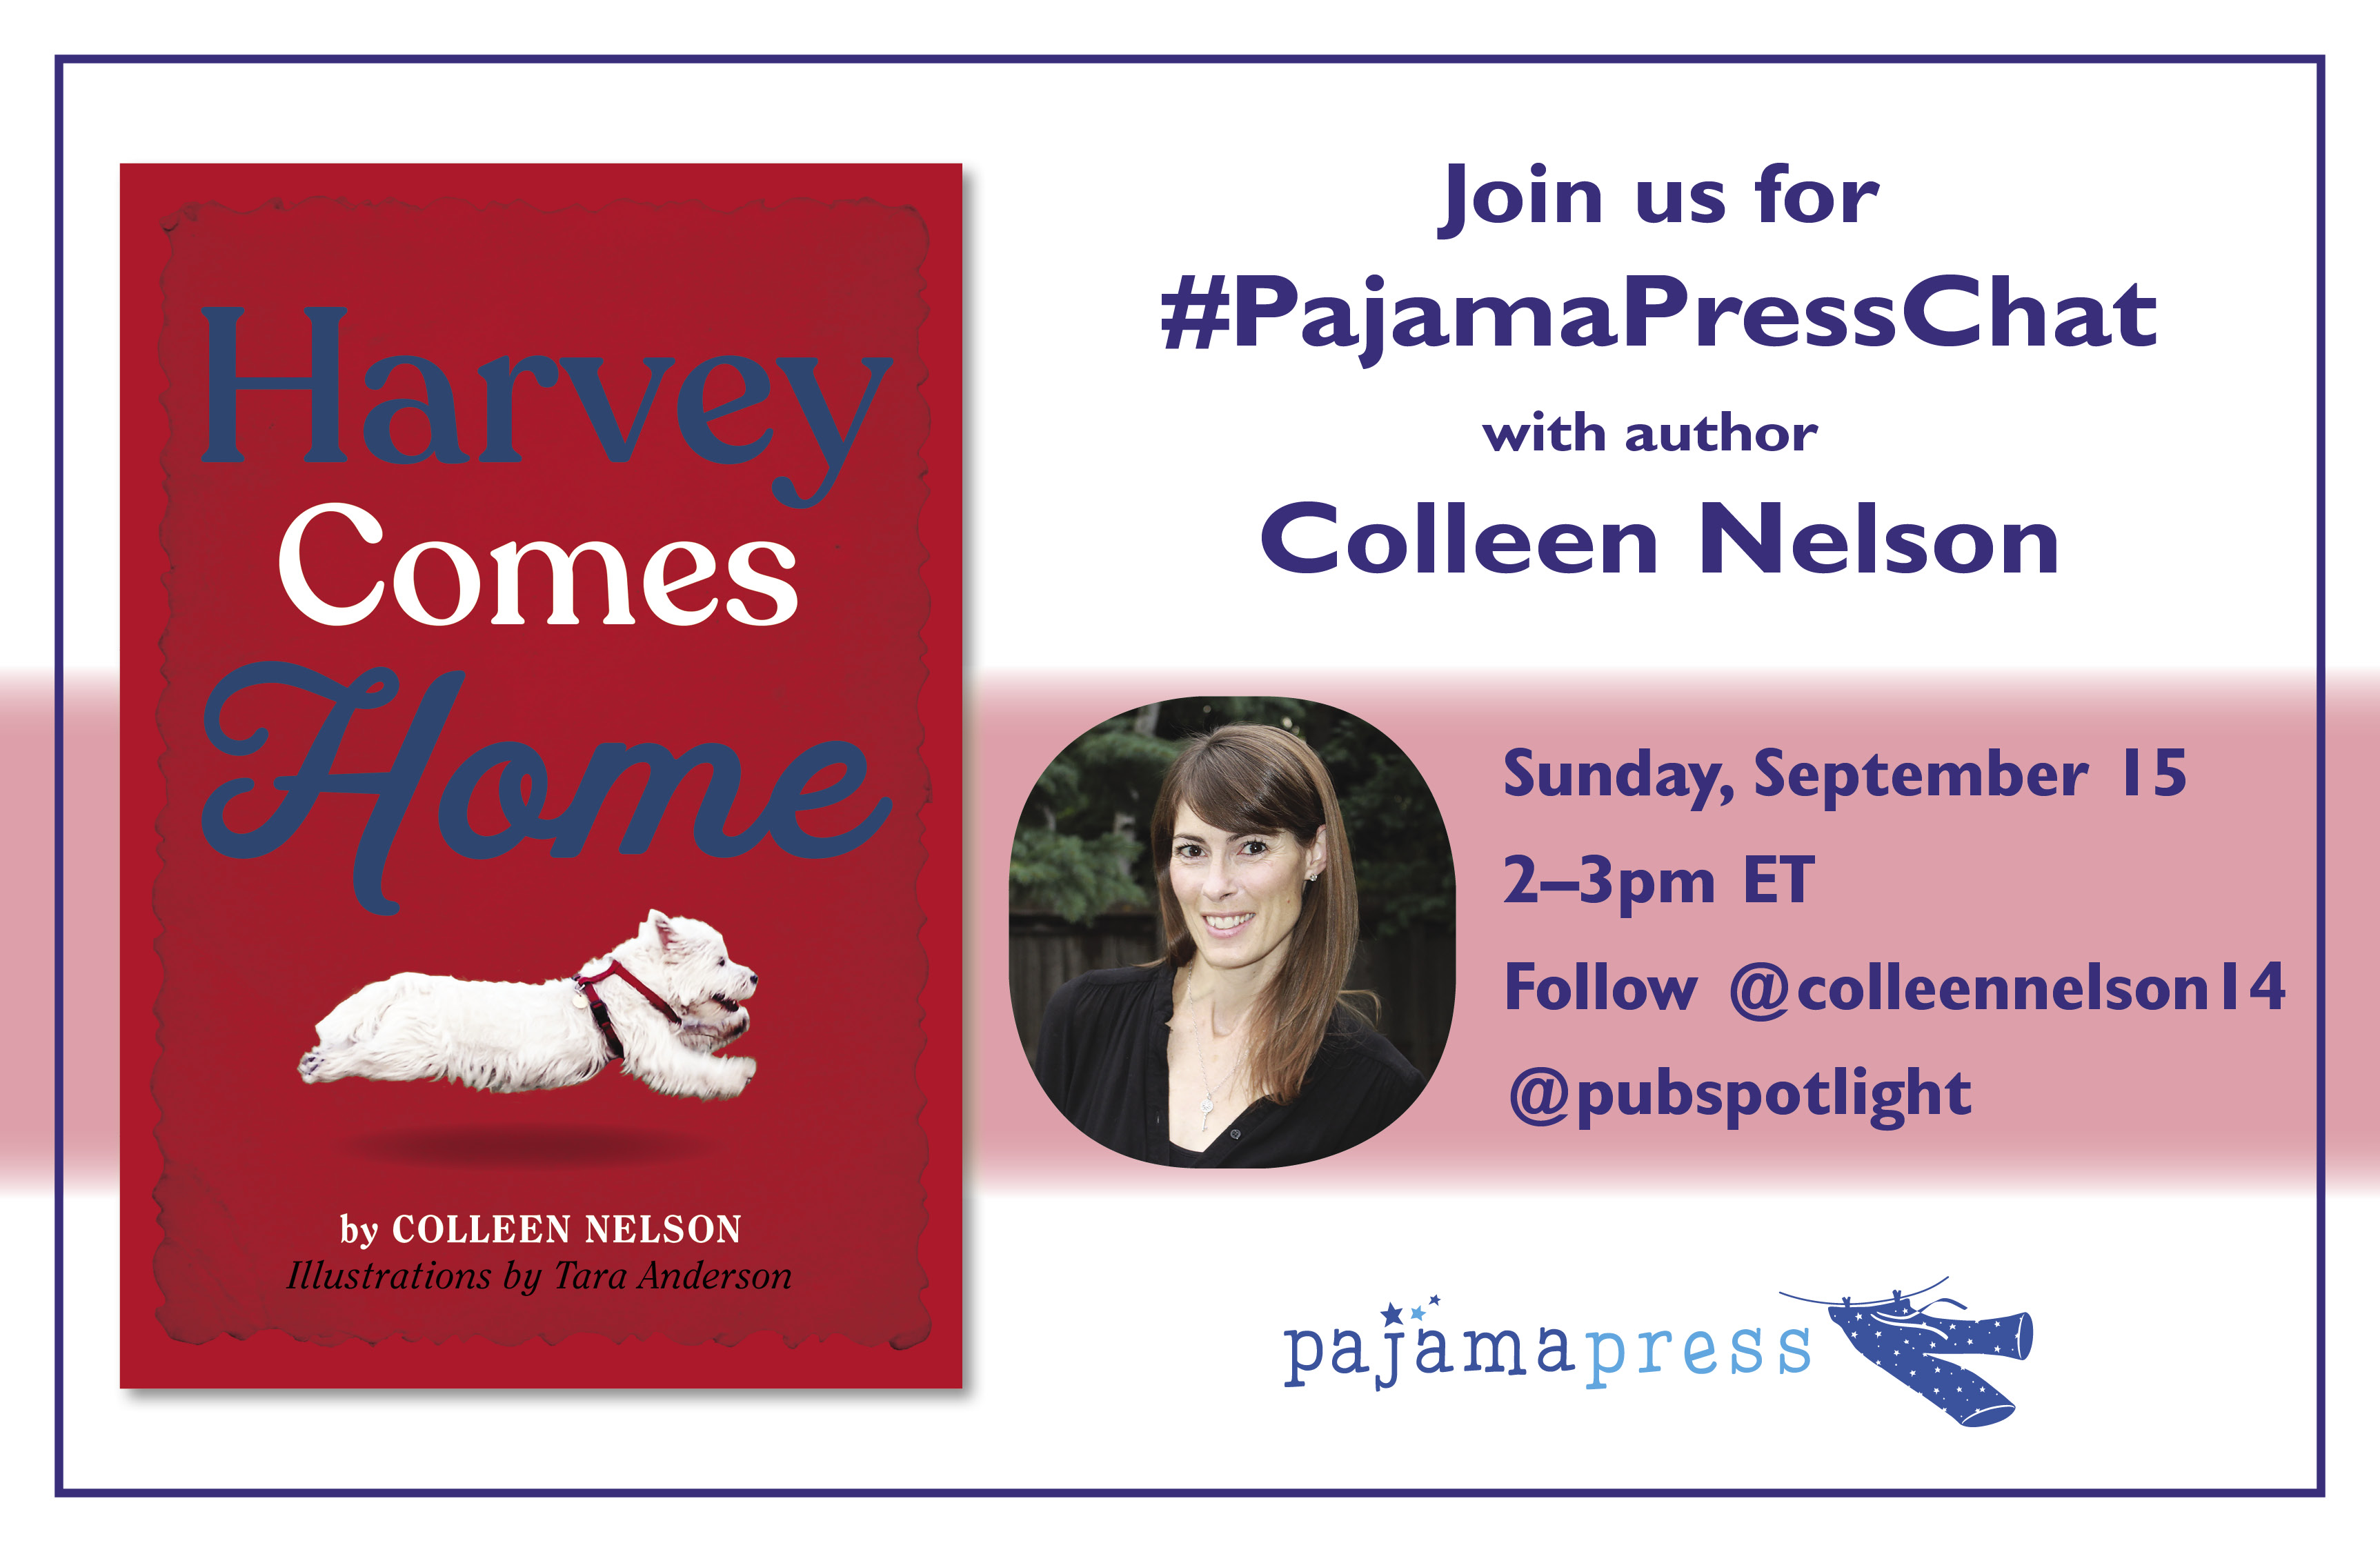 Twitter Chat graphic for Colleen Nelson